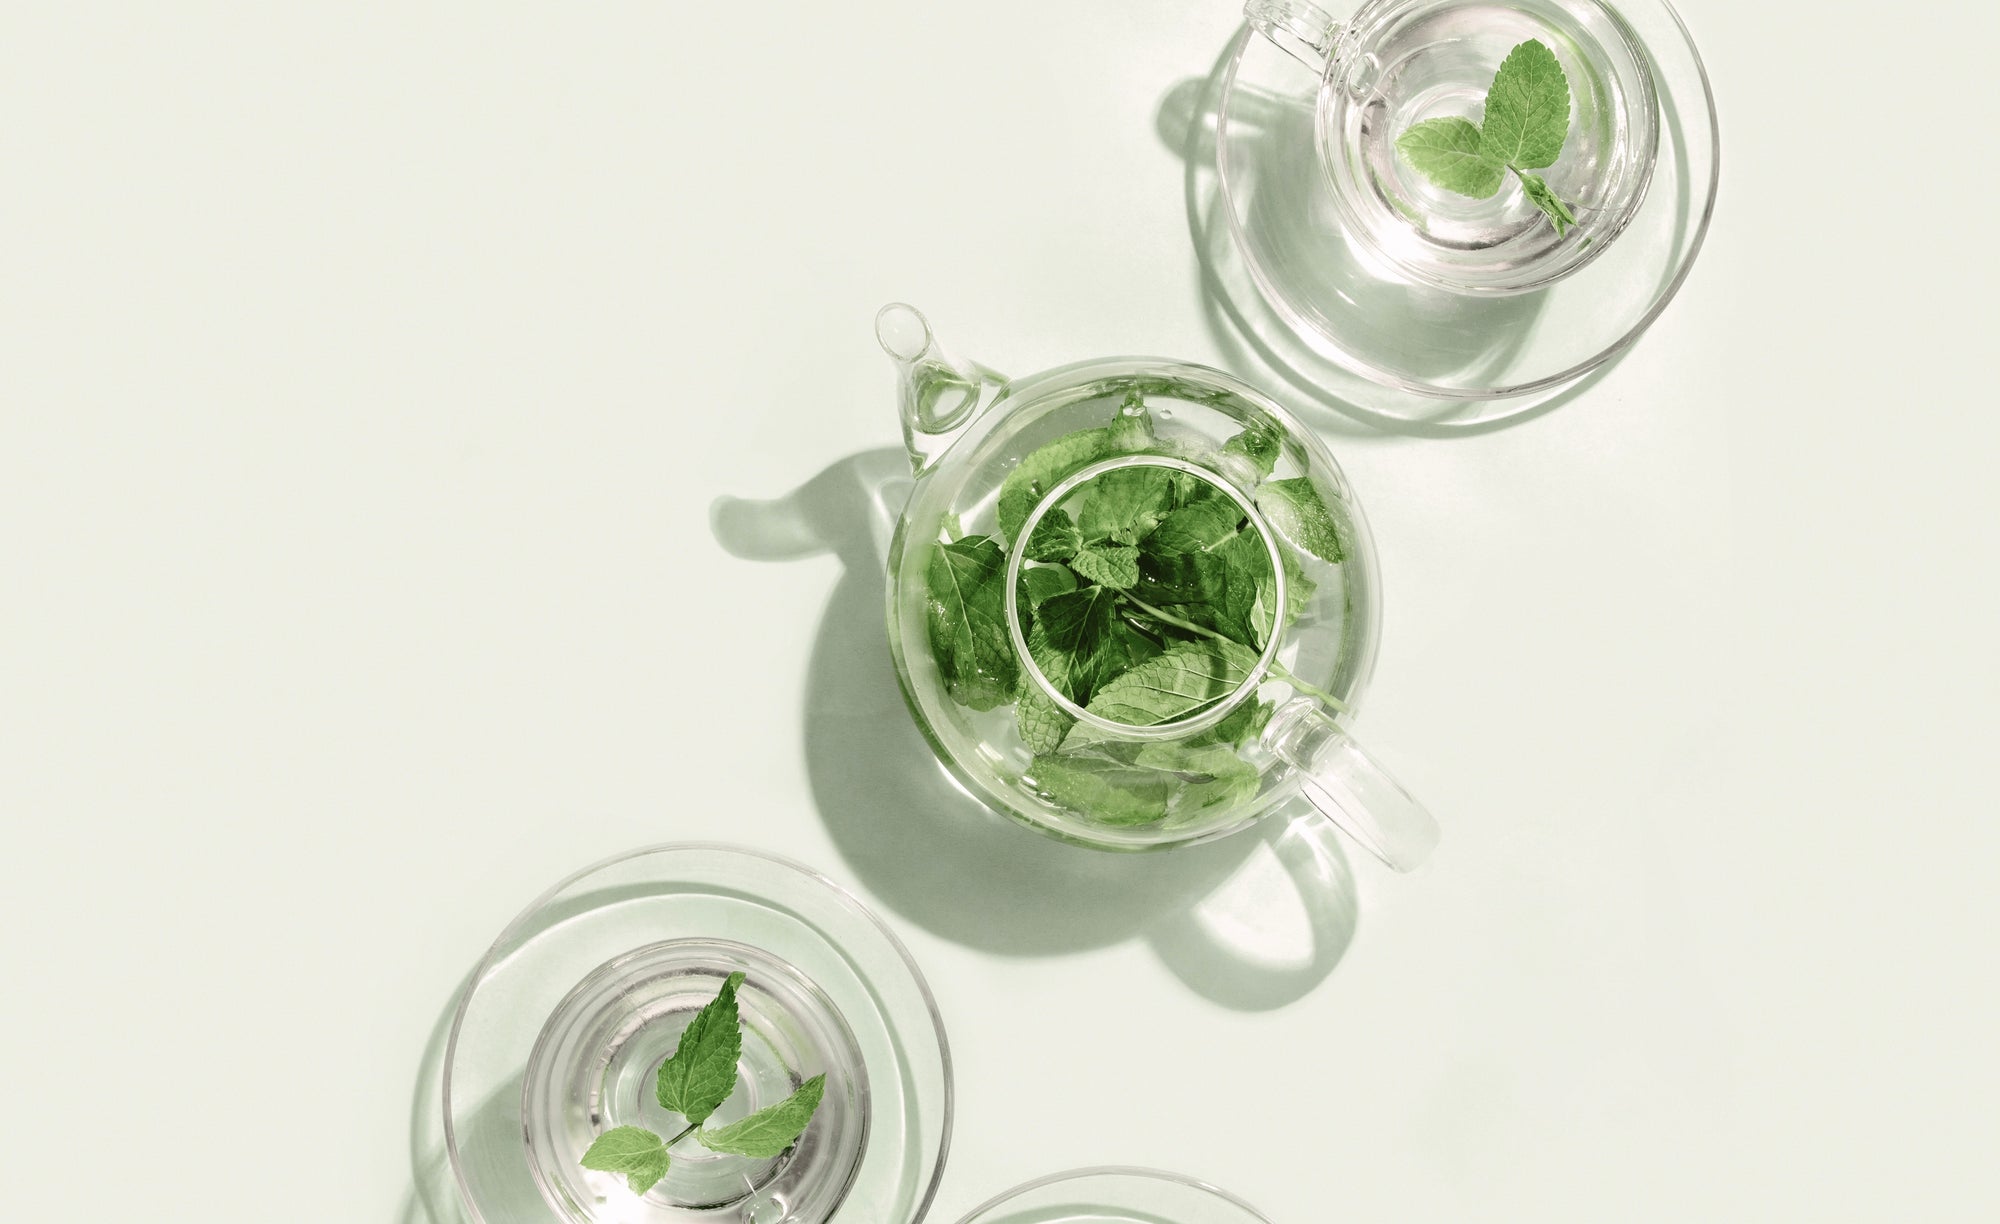 Spearmint Tea for Acne: Is it Safe and Effective?